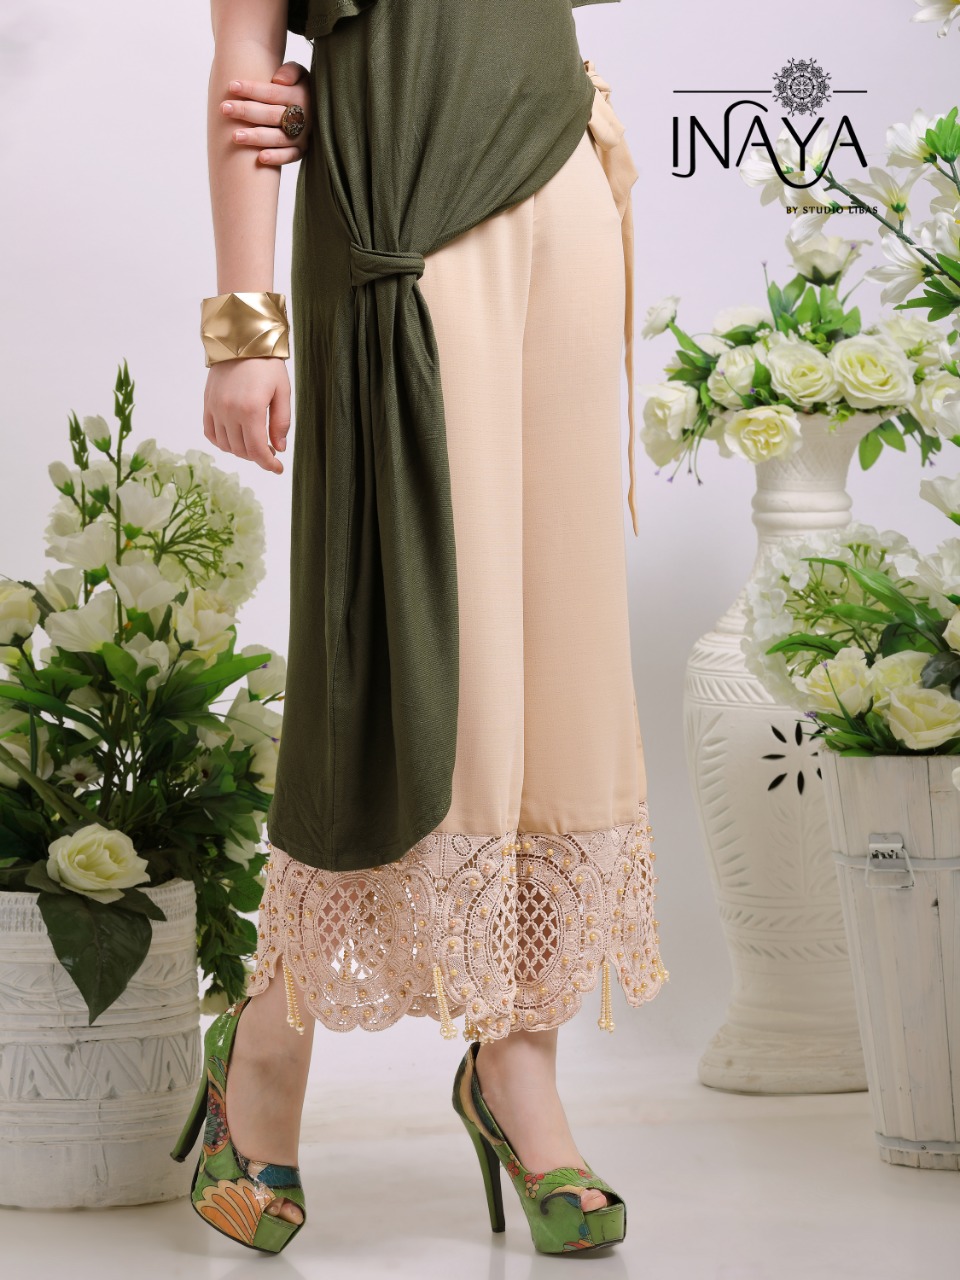 Inaya by studio libas Launch designer culottes pants stylish western wear collection Of pants